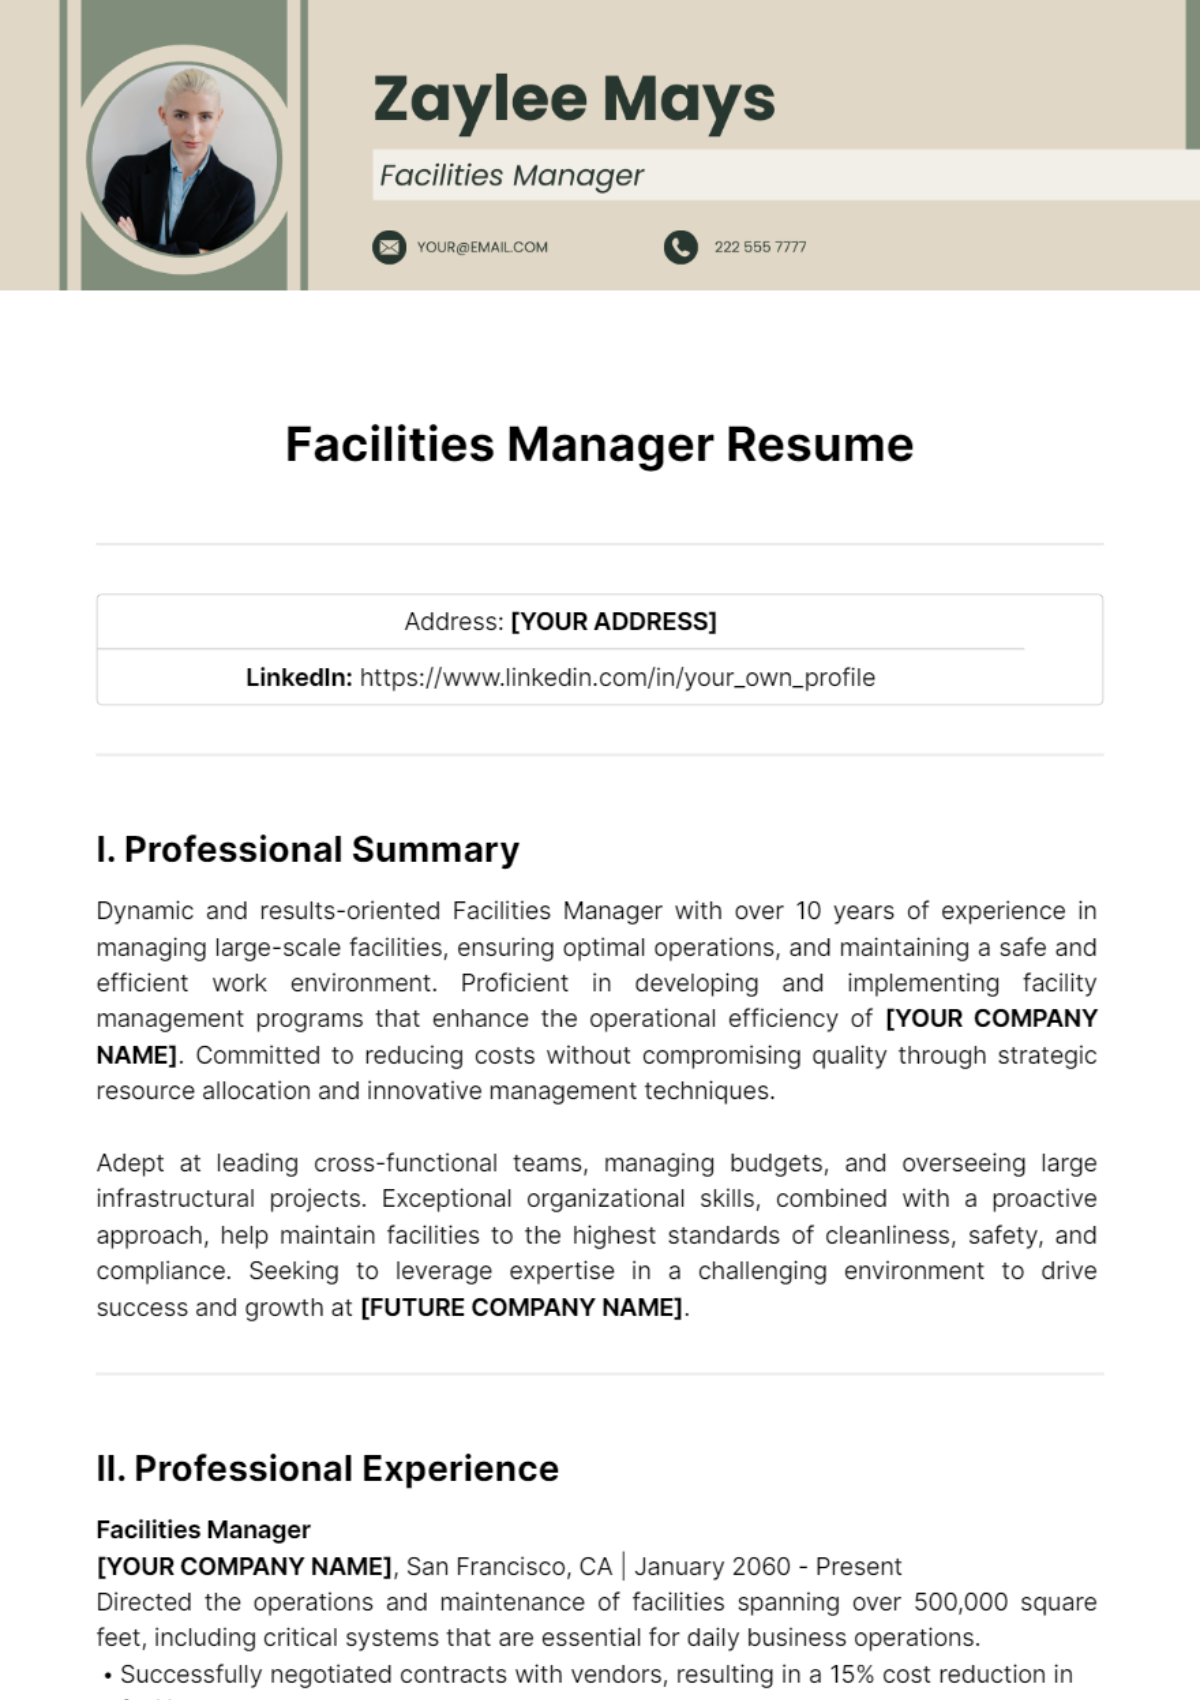 Facilities Manager Resume Template